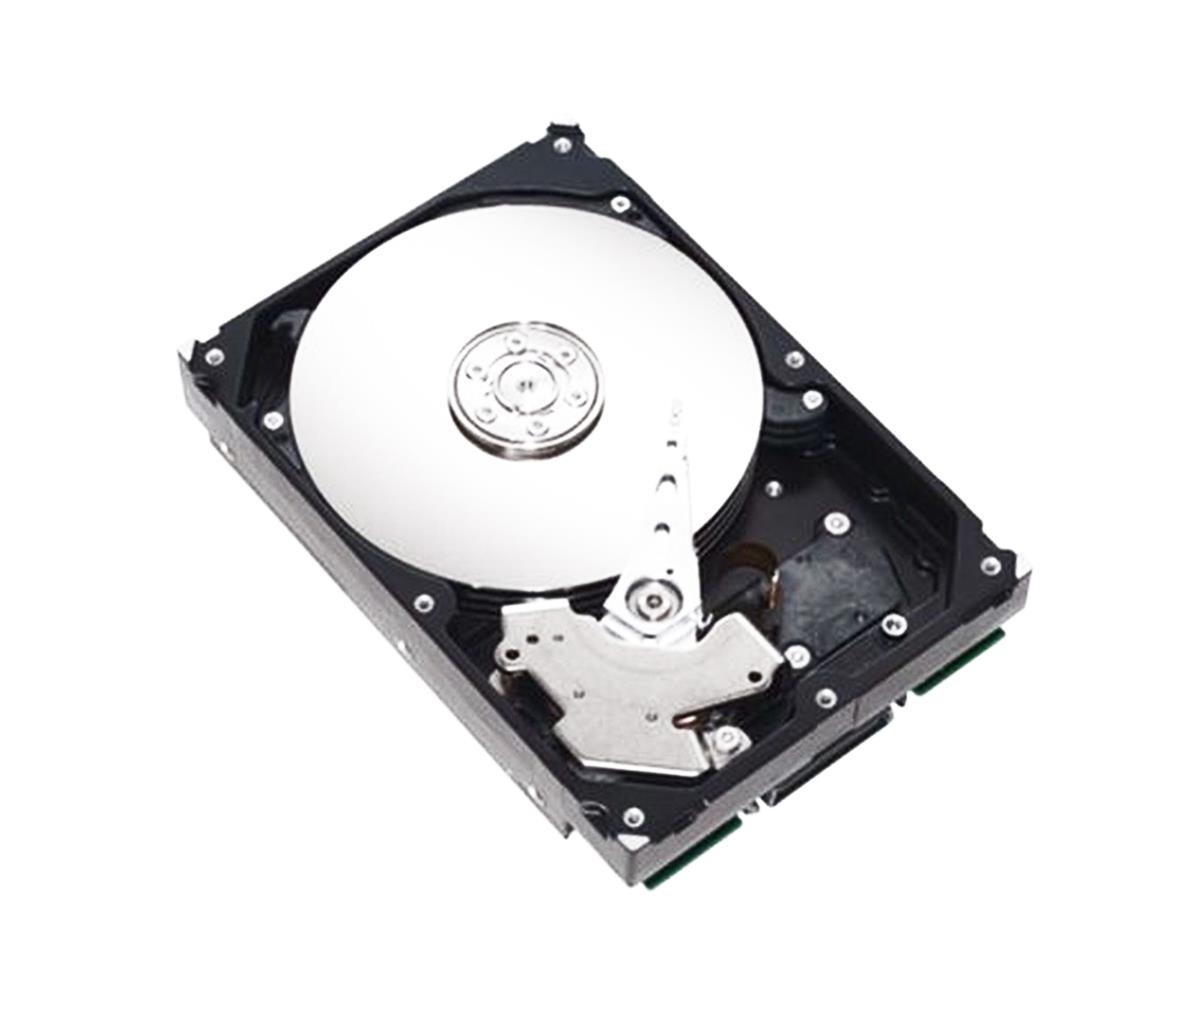 9Y8204-030 Seagate NL35 Series 500GB 7200RPM Fibre Channel 2Gbps 8MB Cache 3.5-inch Internal Hard Drive